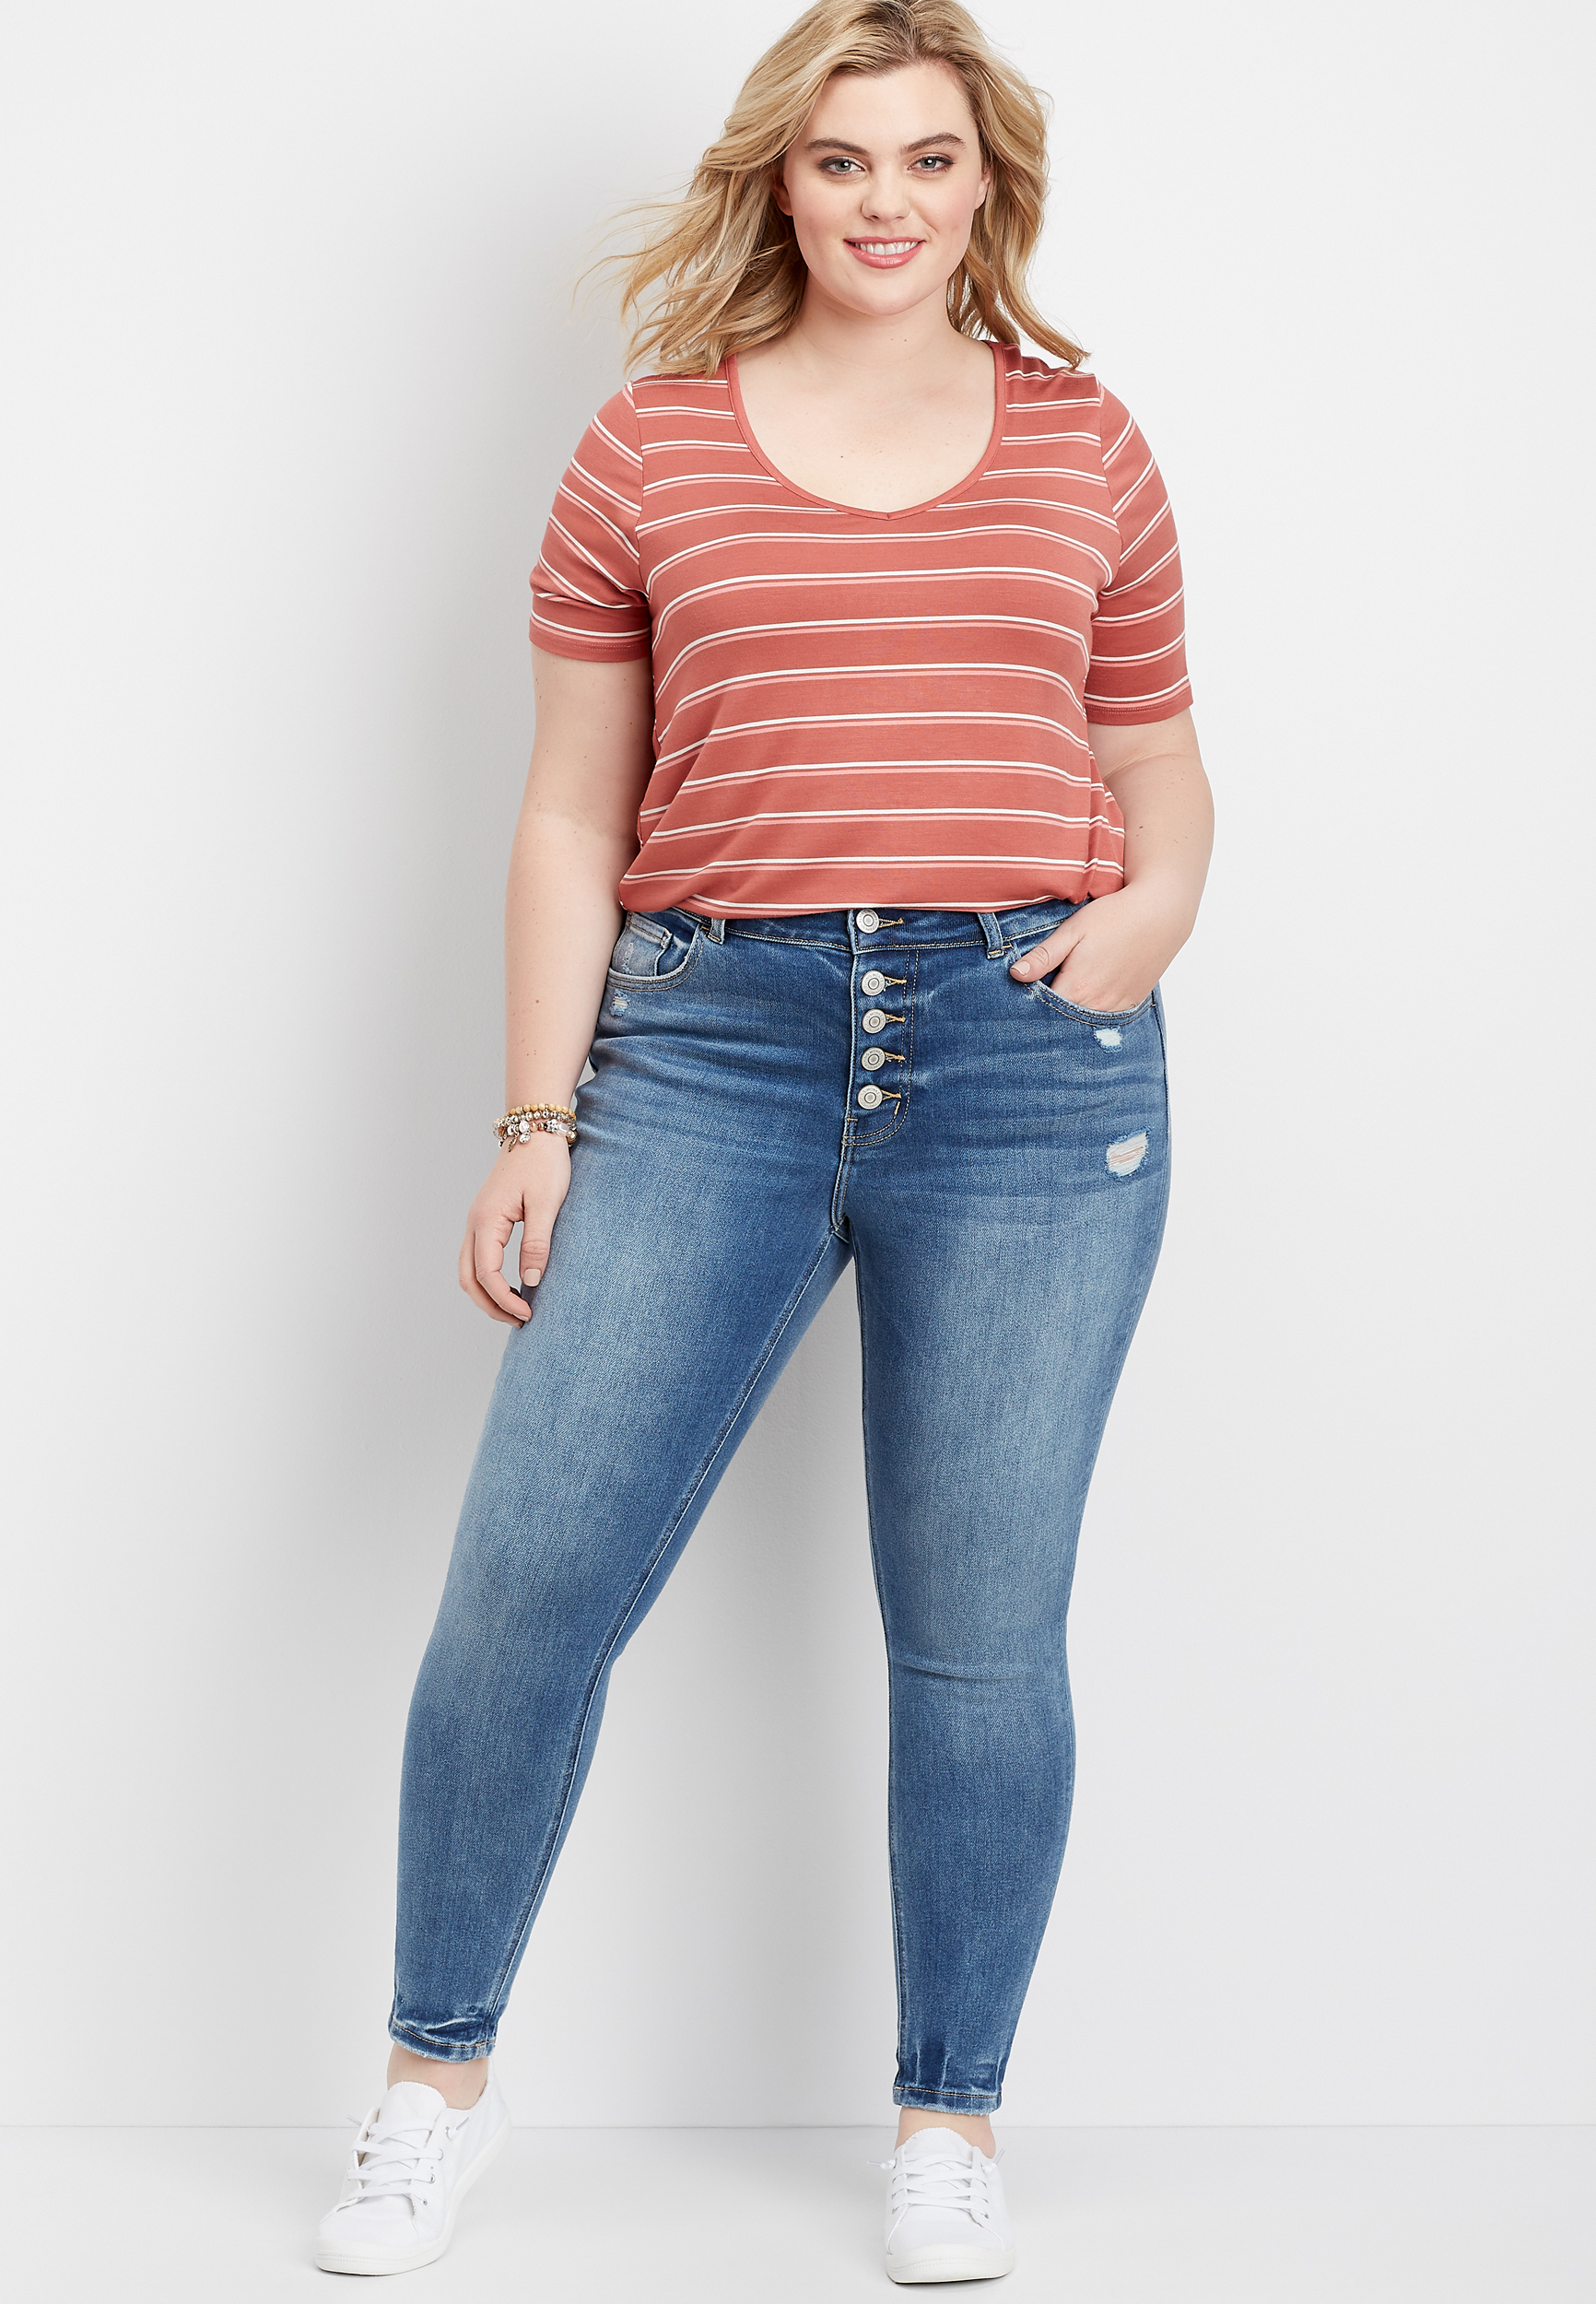 button fly jeans plus size